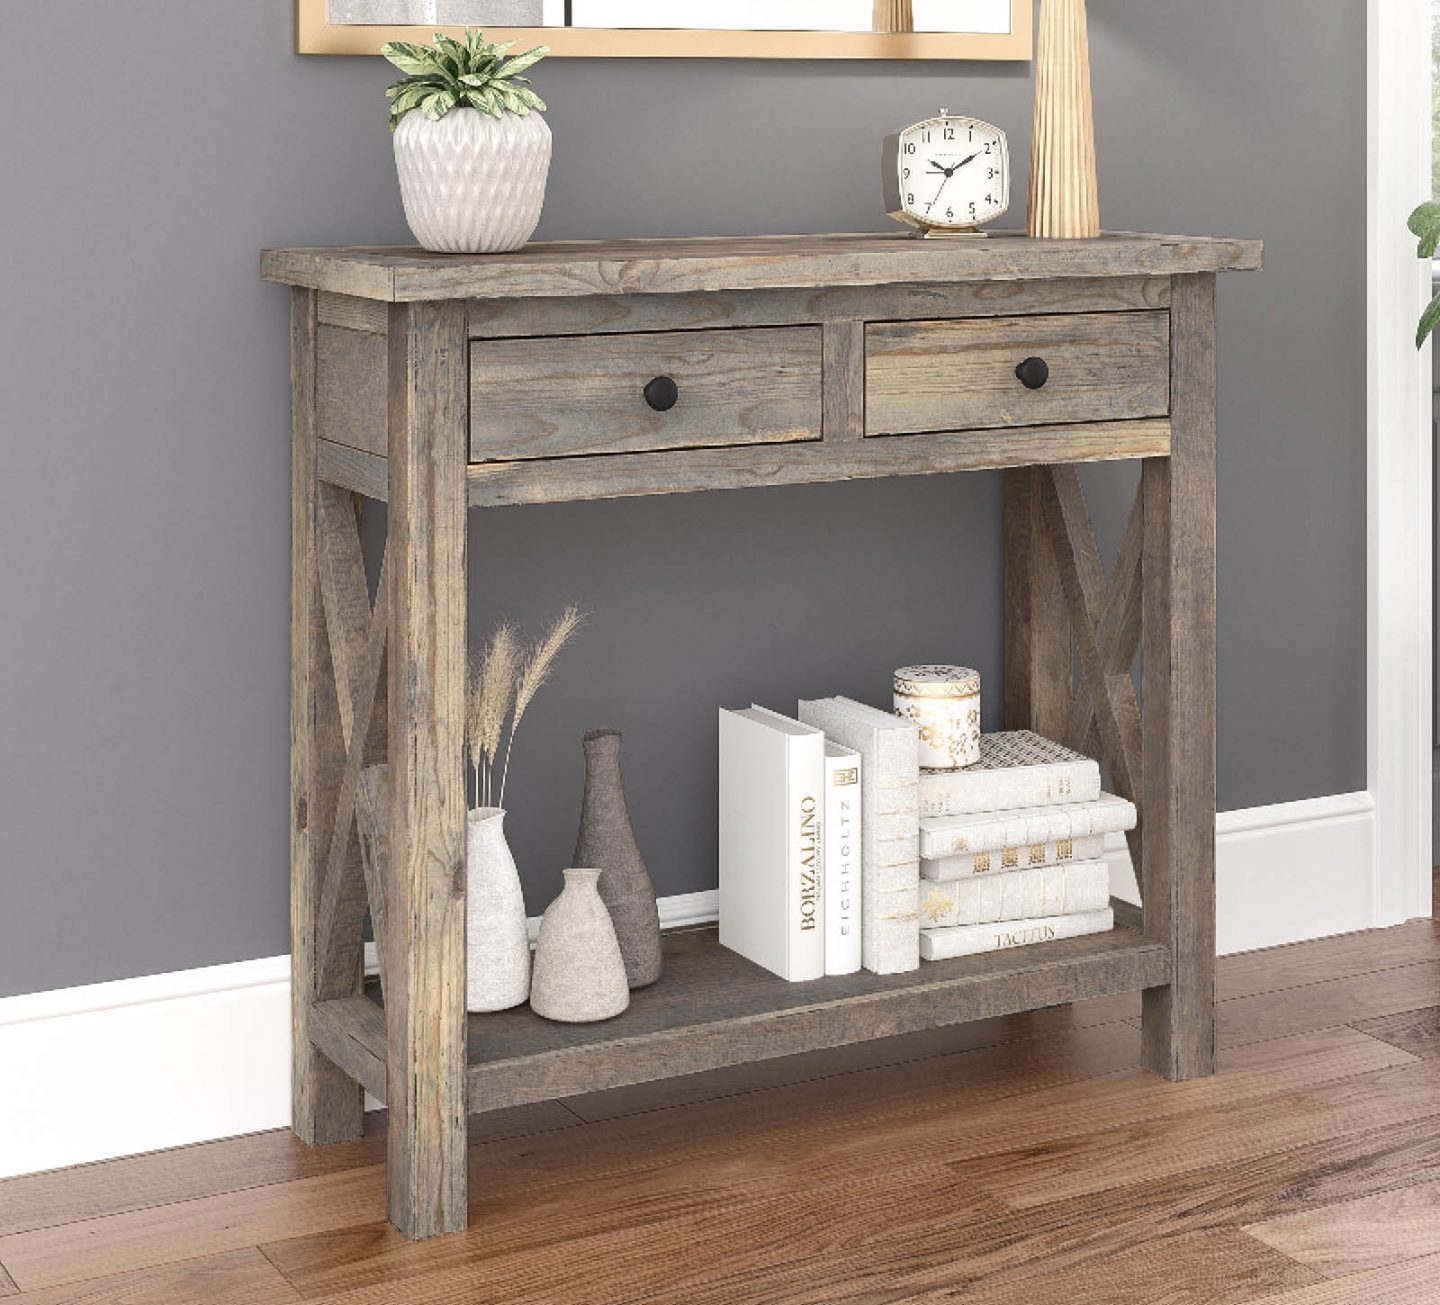 Add a Unique Touch with a Narrow Console Table